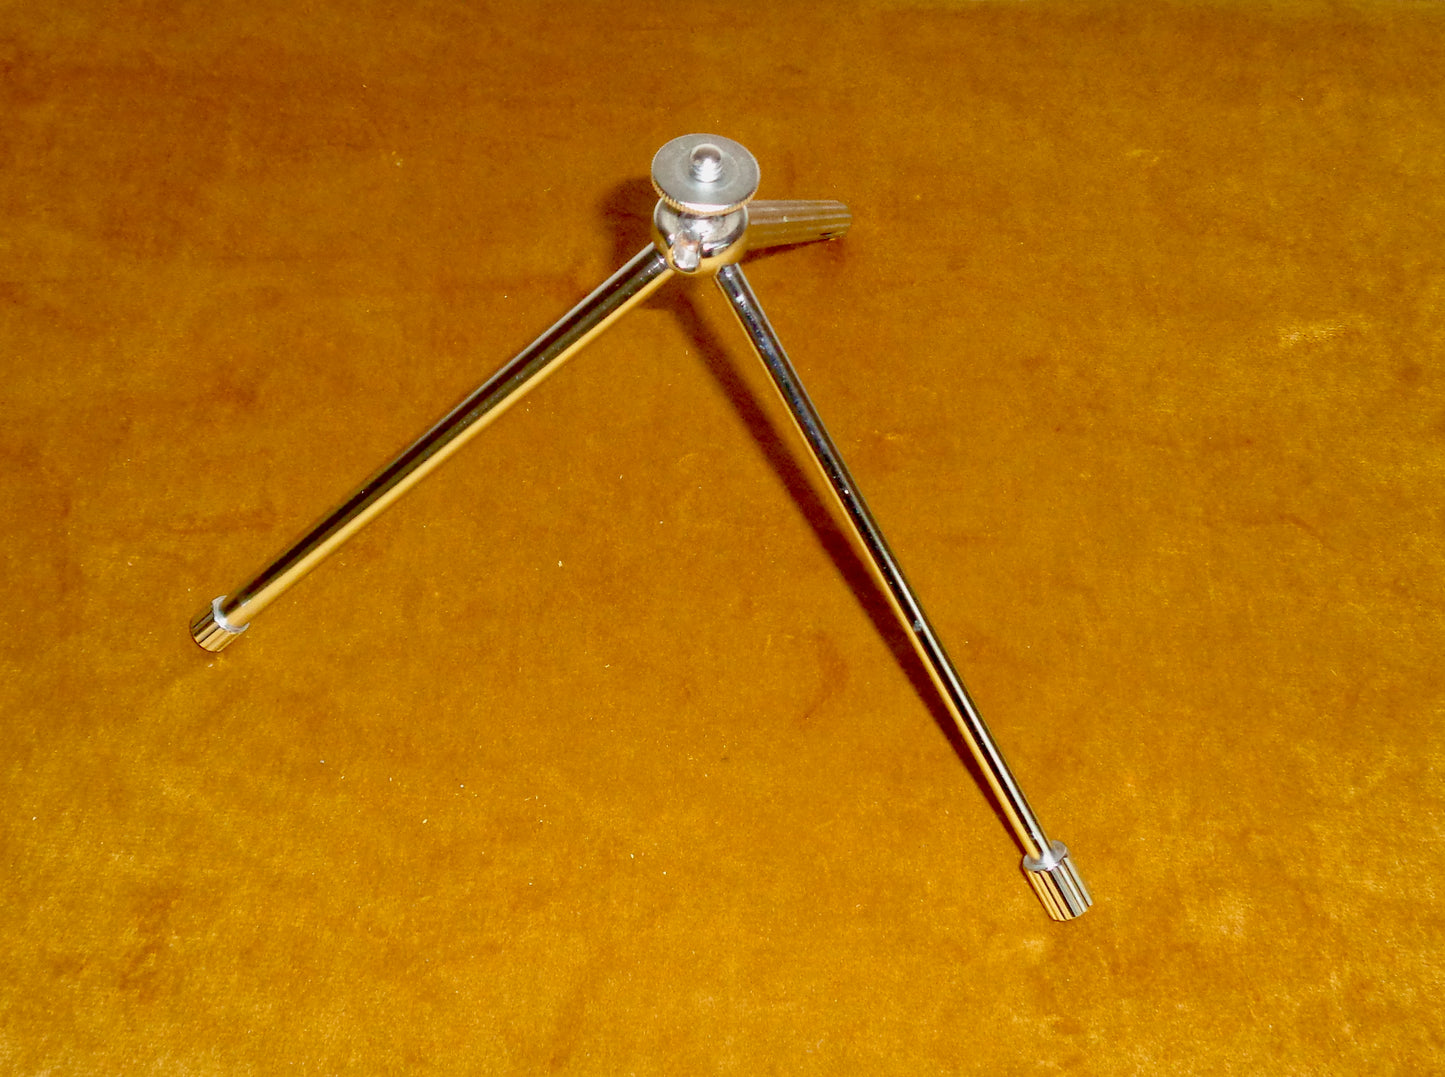 Vintage Minox Camera Tripod With Cable Release